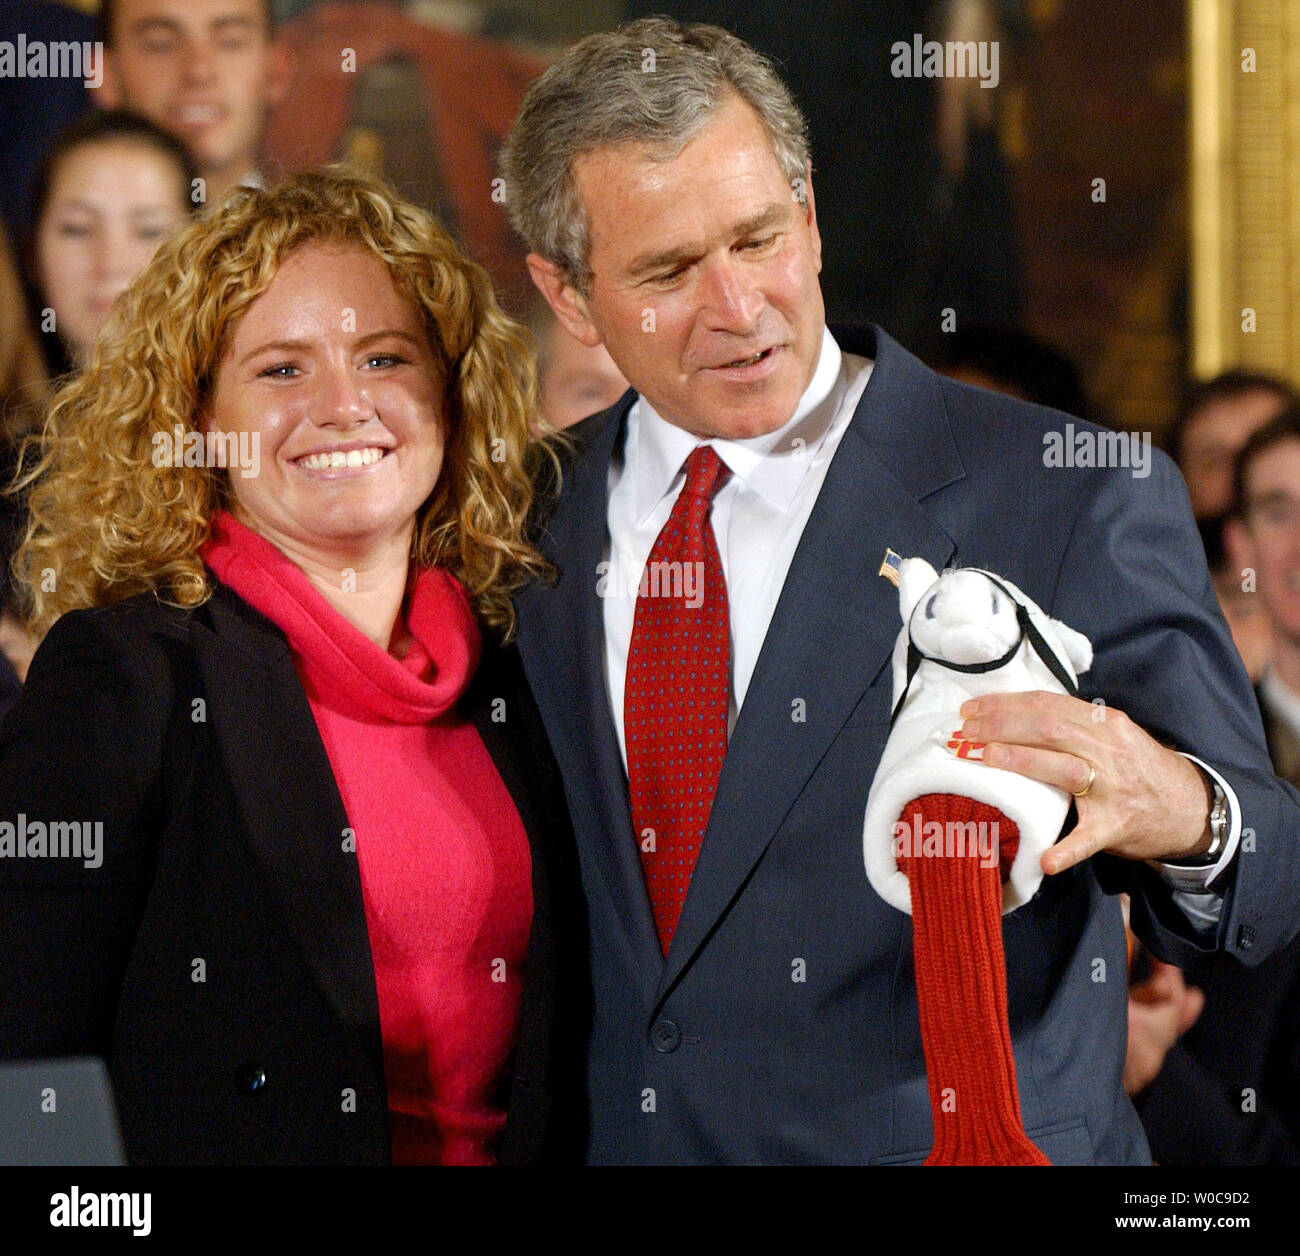 President George W. Bush checks out a golf wood cover given to him by Mikaela Parmlid, University of Southern California Women's Golf, during a ceremony honoring NCAA champion teams in the East Room of the White House on November 17, 2003. Present were University of Illinois-Champaign Men's Tennis, University of Florida Women's Tennis, University of Virginia Men's Lacrosse, Princeton's Women's Lacrosse, Rice University Men's Baseball, UCLA Women's Softball, Clemson University Men's Golf, and University of Southern California Women's Golf.   (UPI Photo/Roger L. Wollenberg) Stock Photo